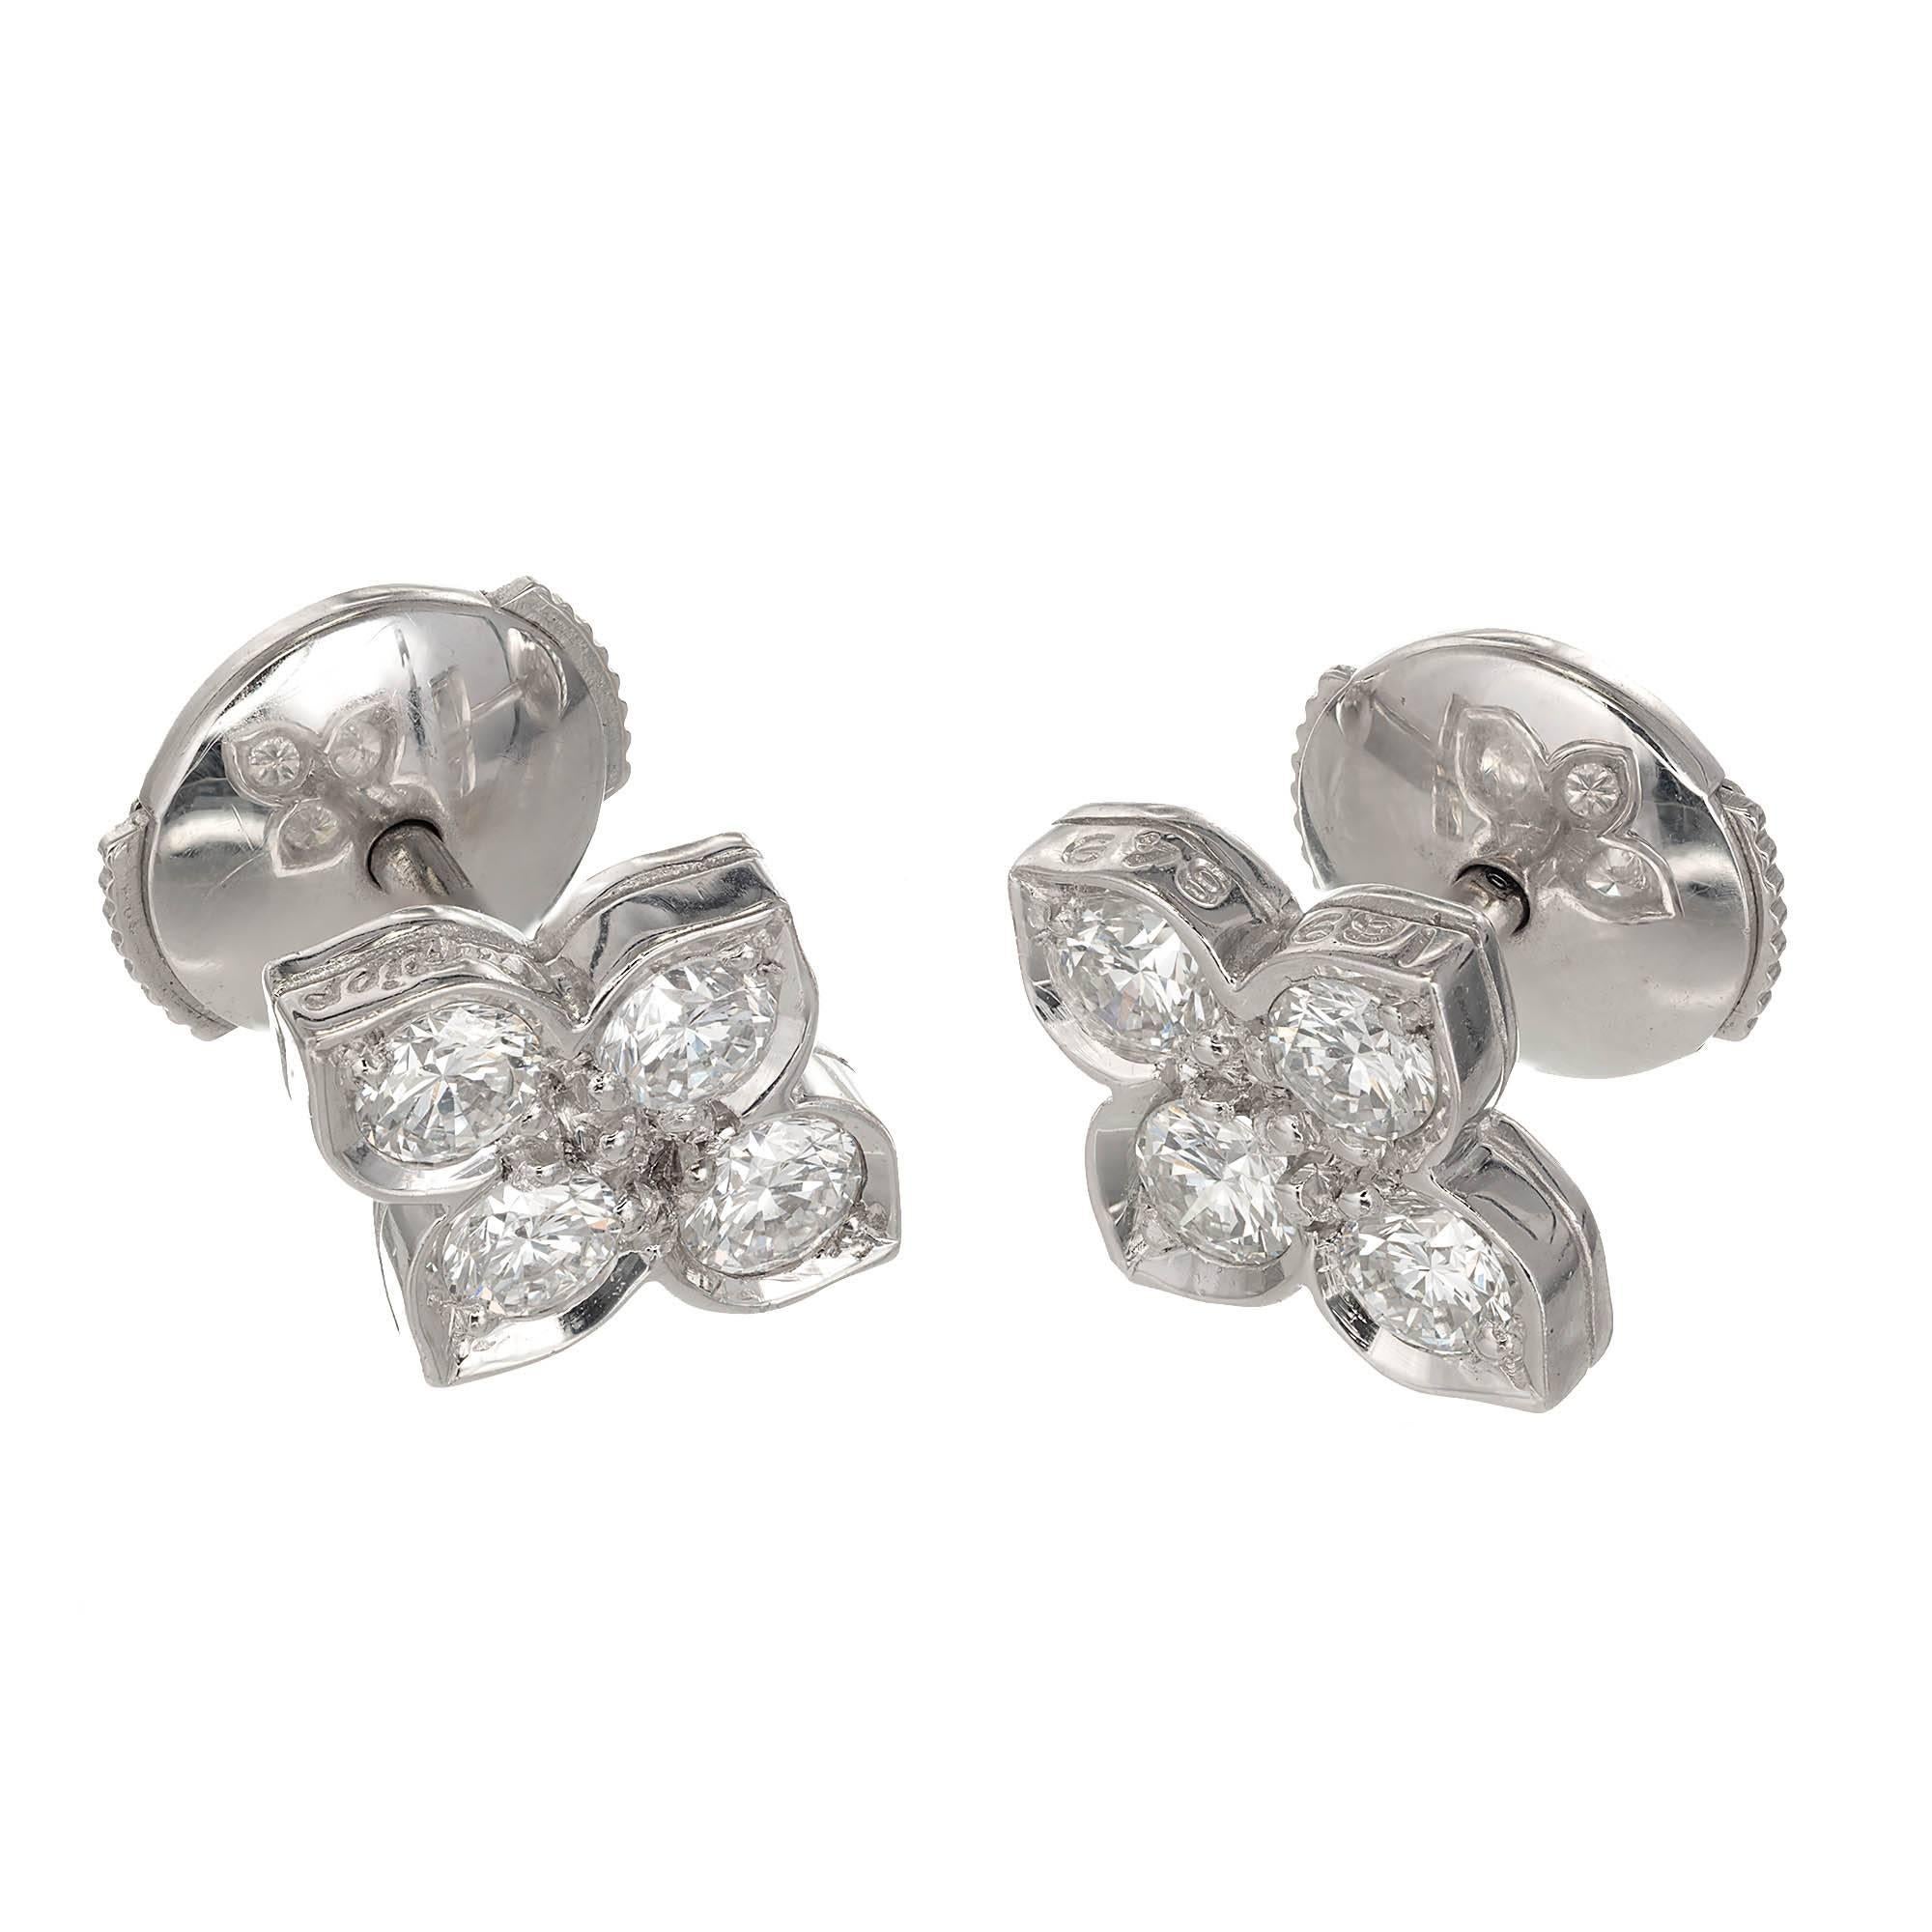 Cartier Hindu 18k white gold Diamond earrings with bright full cut Diamonds.

8 round Diamonds, approx. total weight .80cts, F, VS
18k white gold
Tested: 18k
Stamped: 750
Hallmark: Cartier 678 692 *1 TO
2.7 grams
Top to bottom: 10.54mm or .42